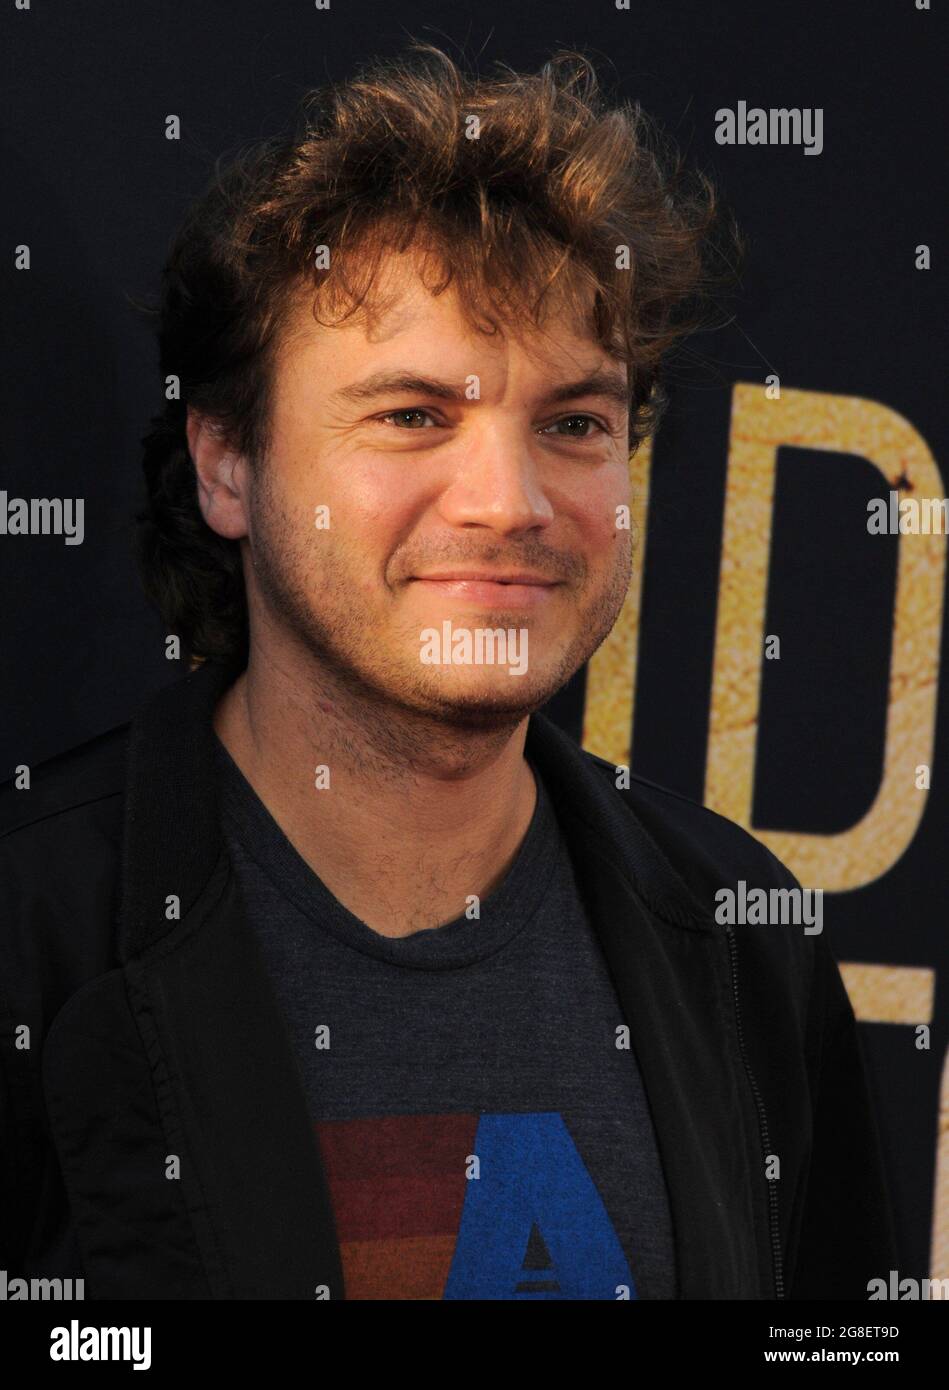 Los Angeles, CA. 19th July, 2021. Emile Hirsch at arrivals for MIDNIGHT IN THE SWITCHGRASS Premiere, Regal LA Live, Los Angeles, CA July 19, 2021. Credit: Elizabeth Goodenough/Everett Collection/Alamy Live News Stock Photo